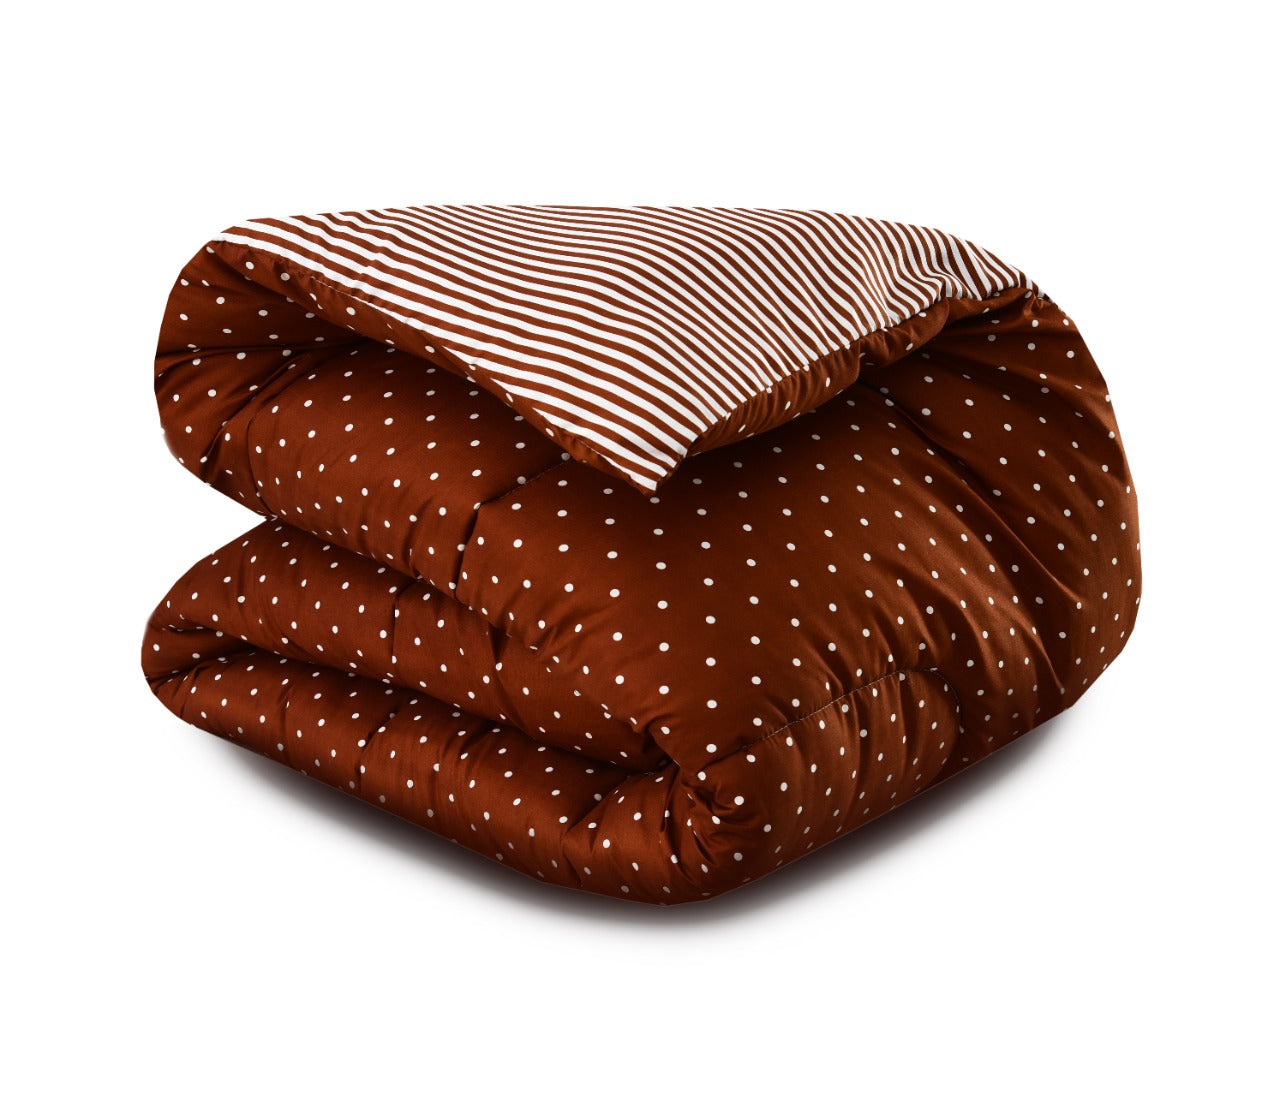 1 PC Double Winter Comforter-Brown Polka Apricot